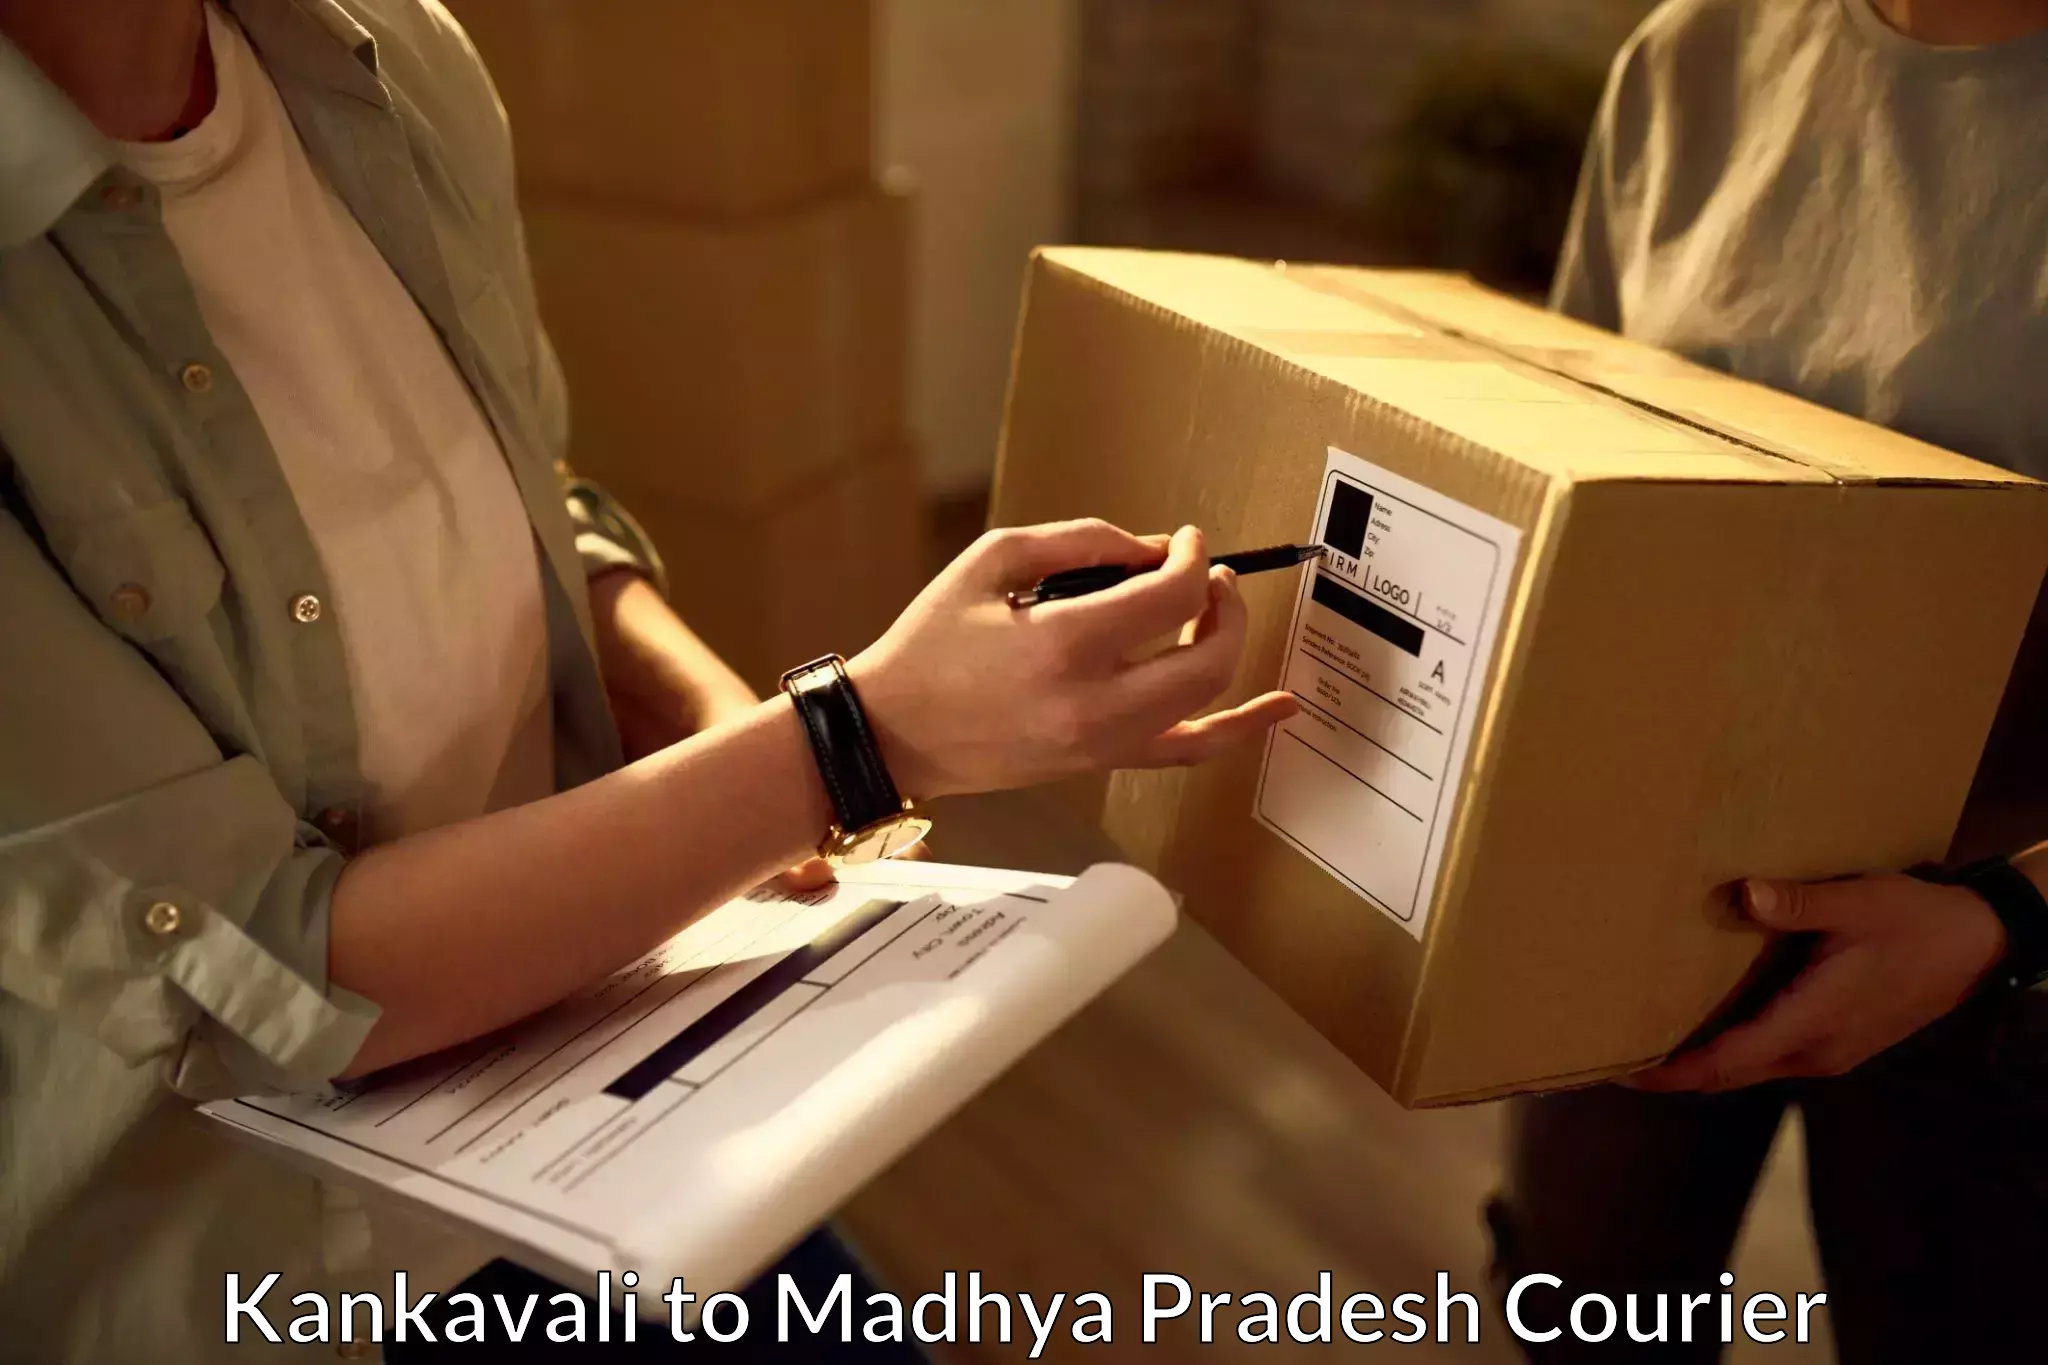 Global courier networks Kankavali to Chand Chaurai